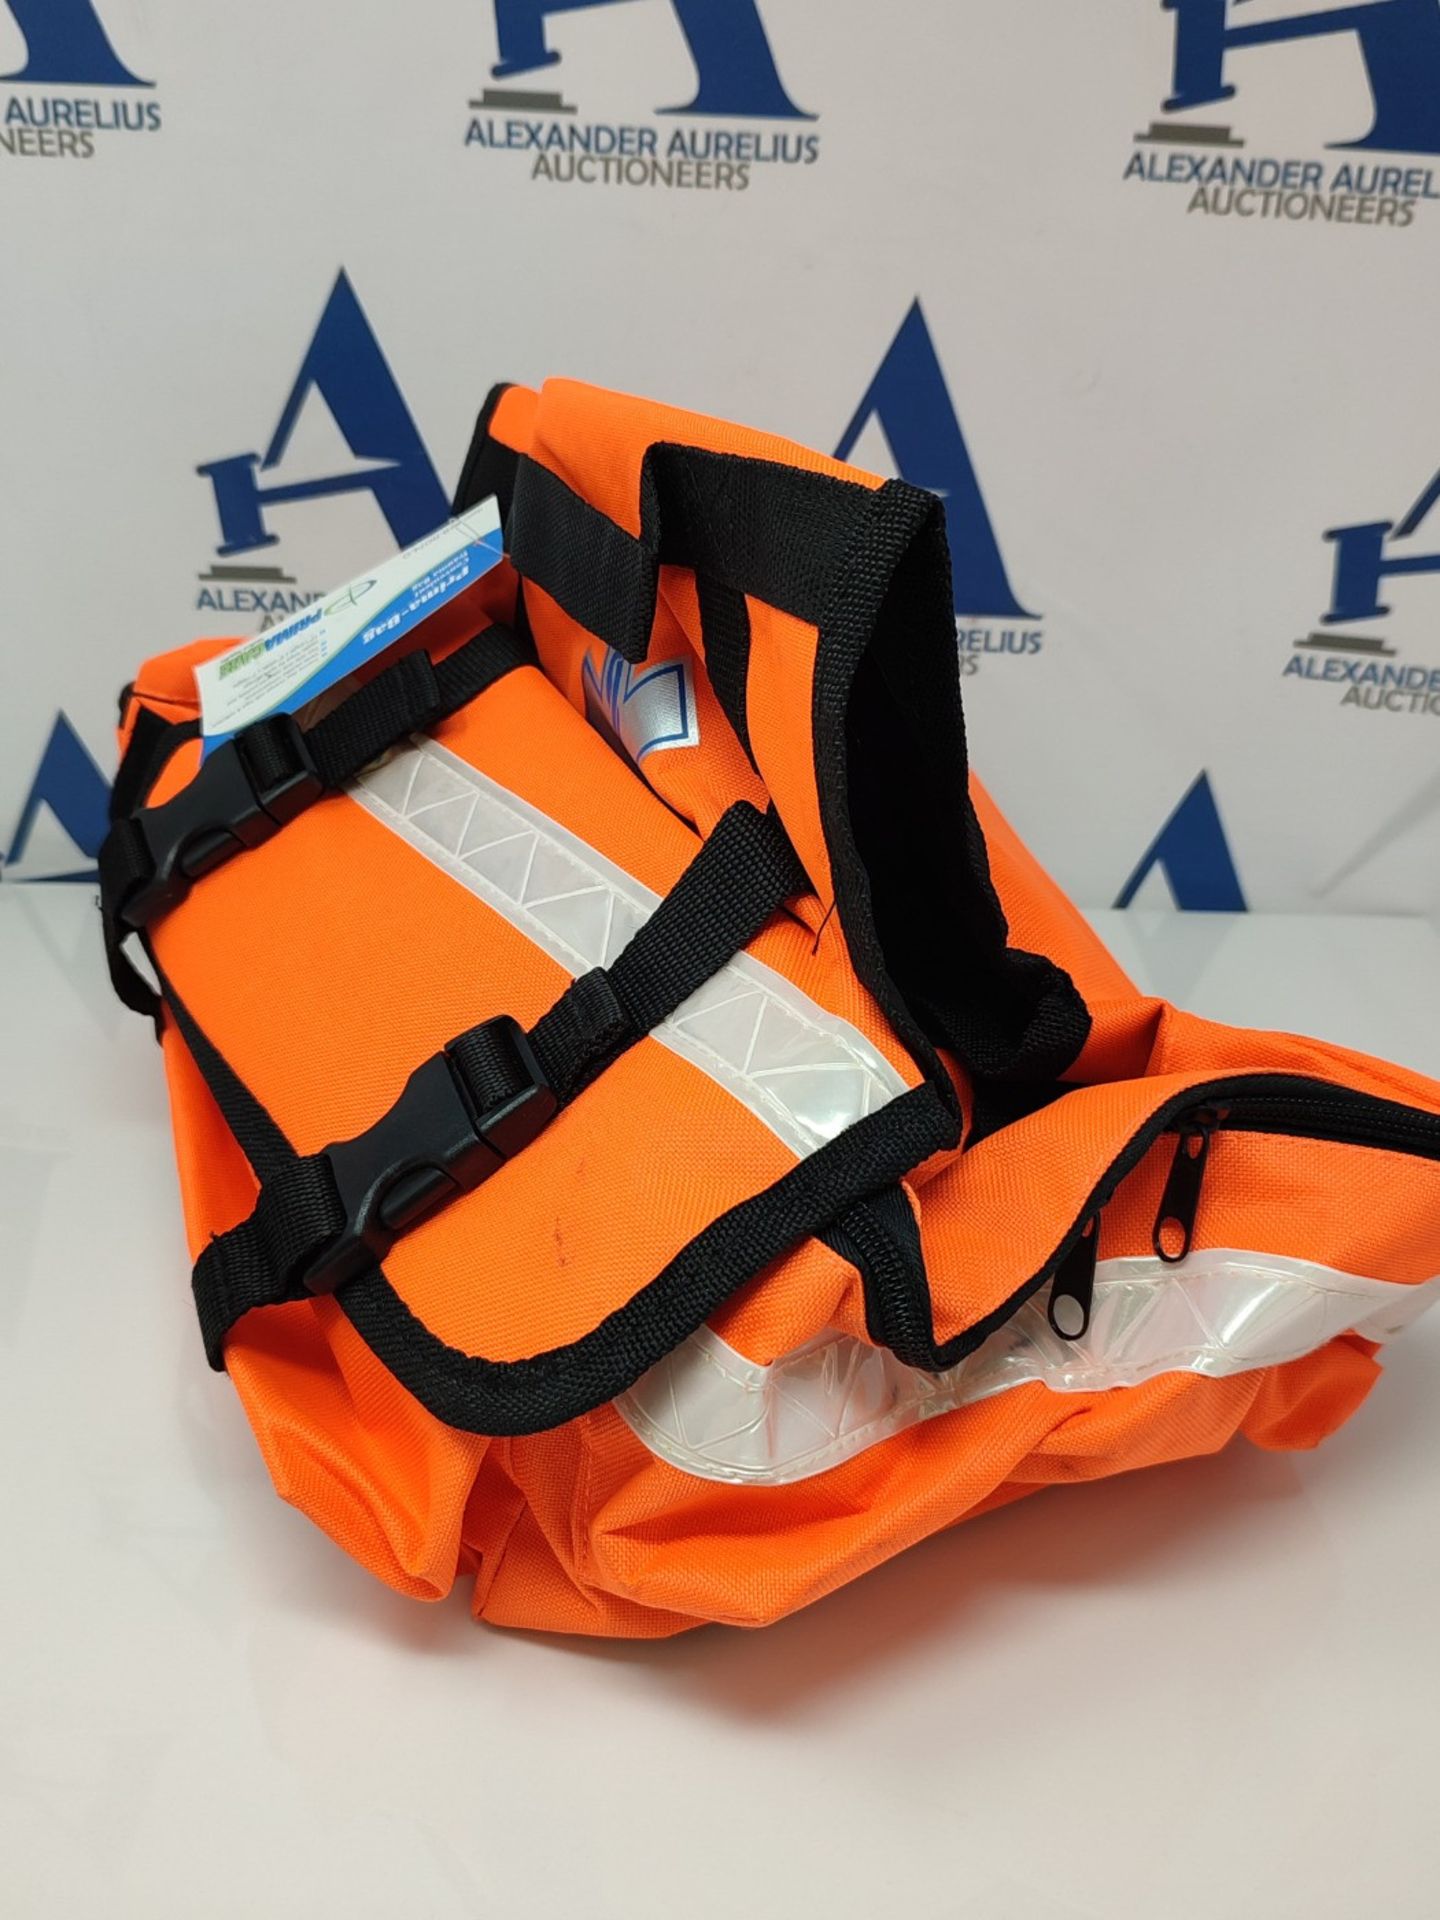 Primacare Medical Supplies KB-RO74-O First Responder Bag for Trauma, Professional Mult - Image 3 of 3